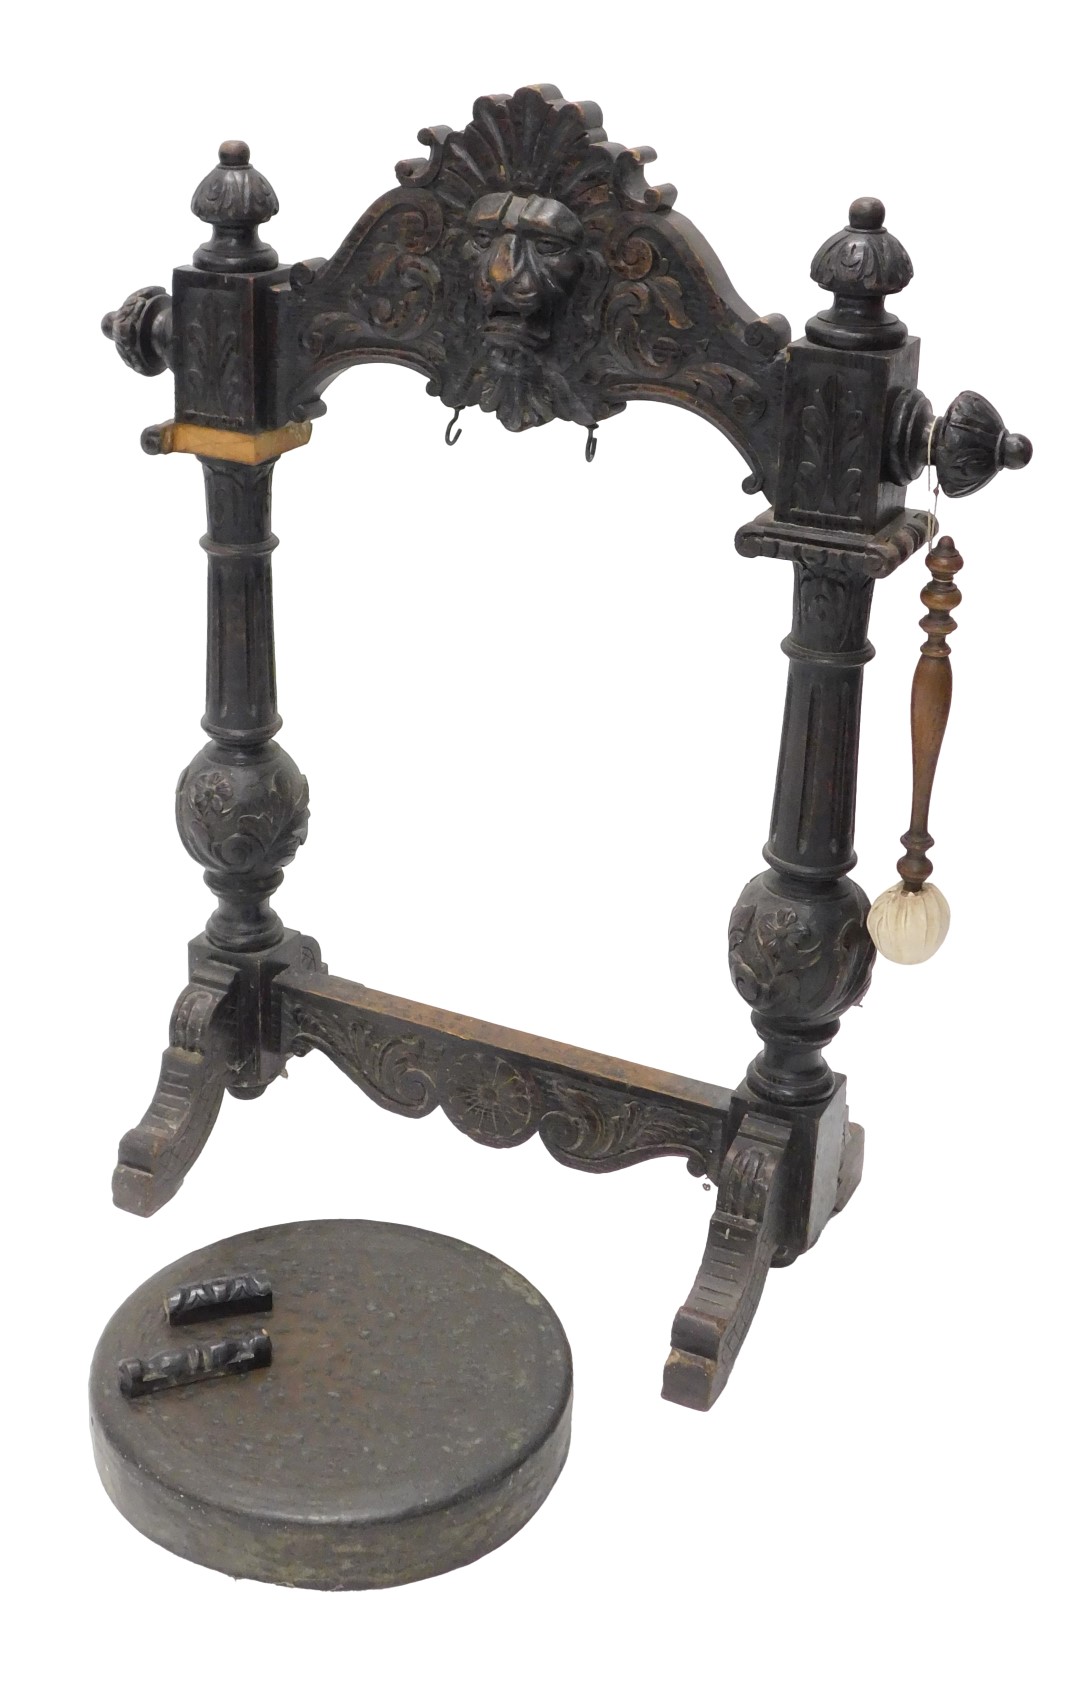 A Victorian ebonised oak dinner gong, the frame with a central lion mask, carved overall with leaves